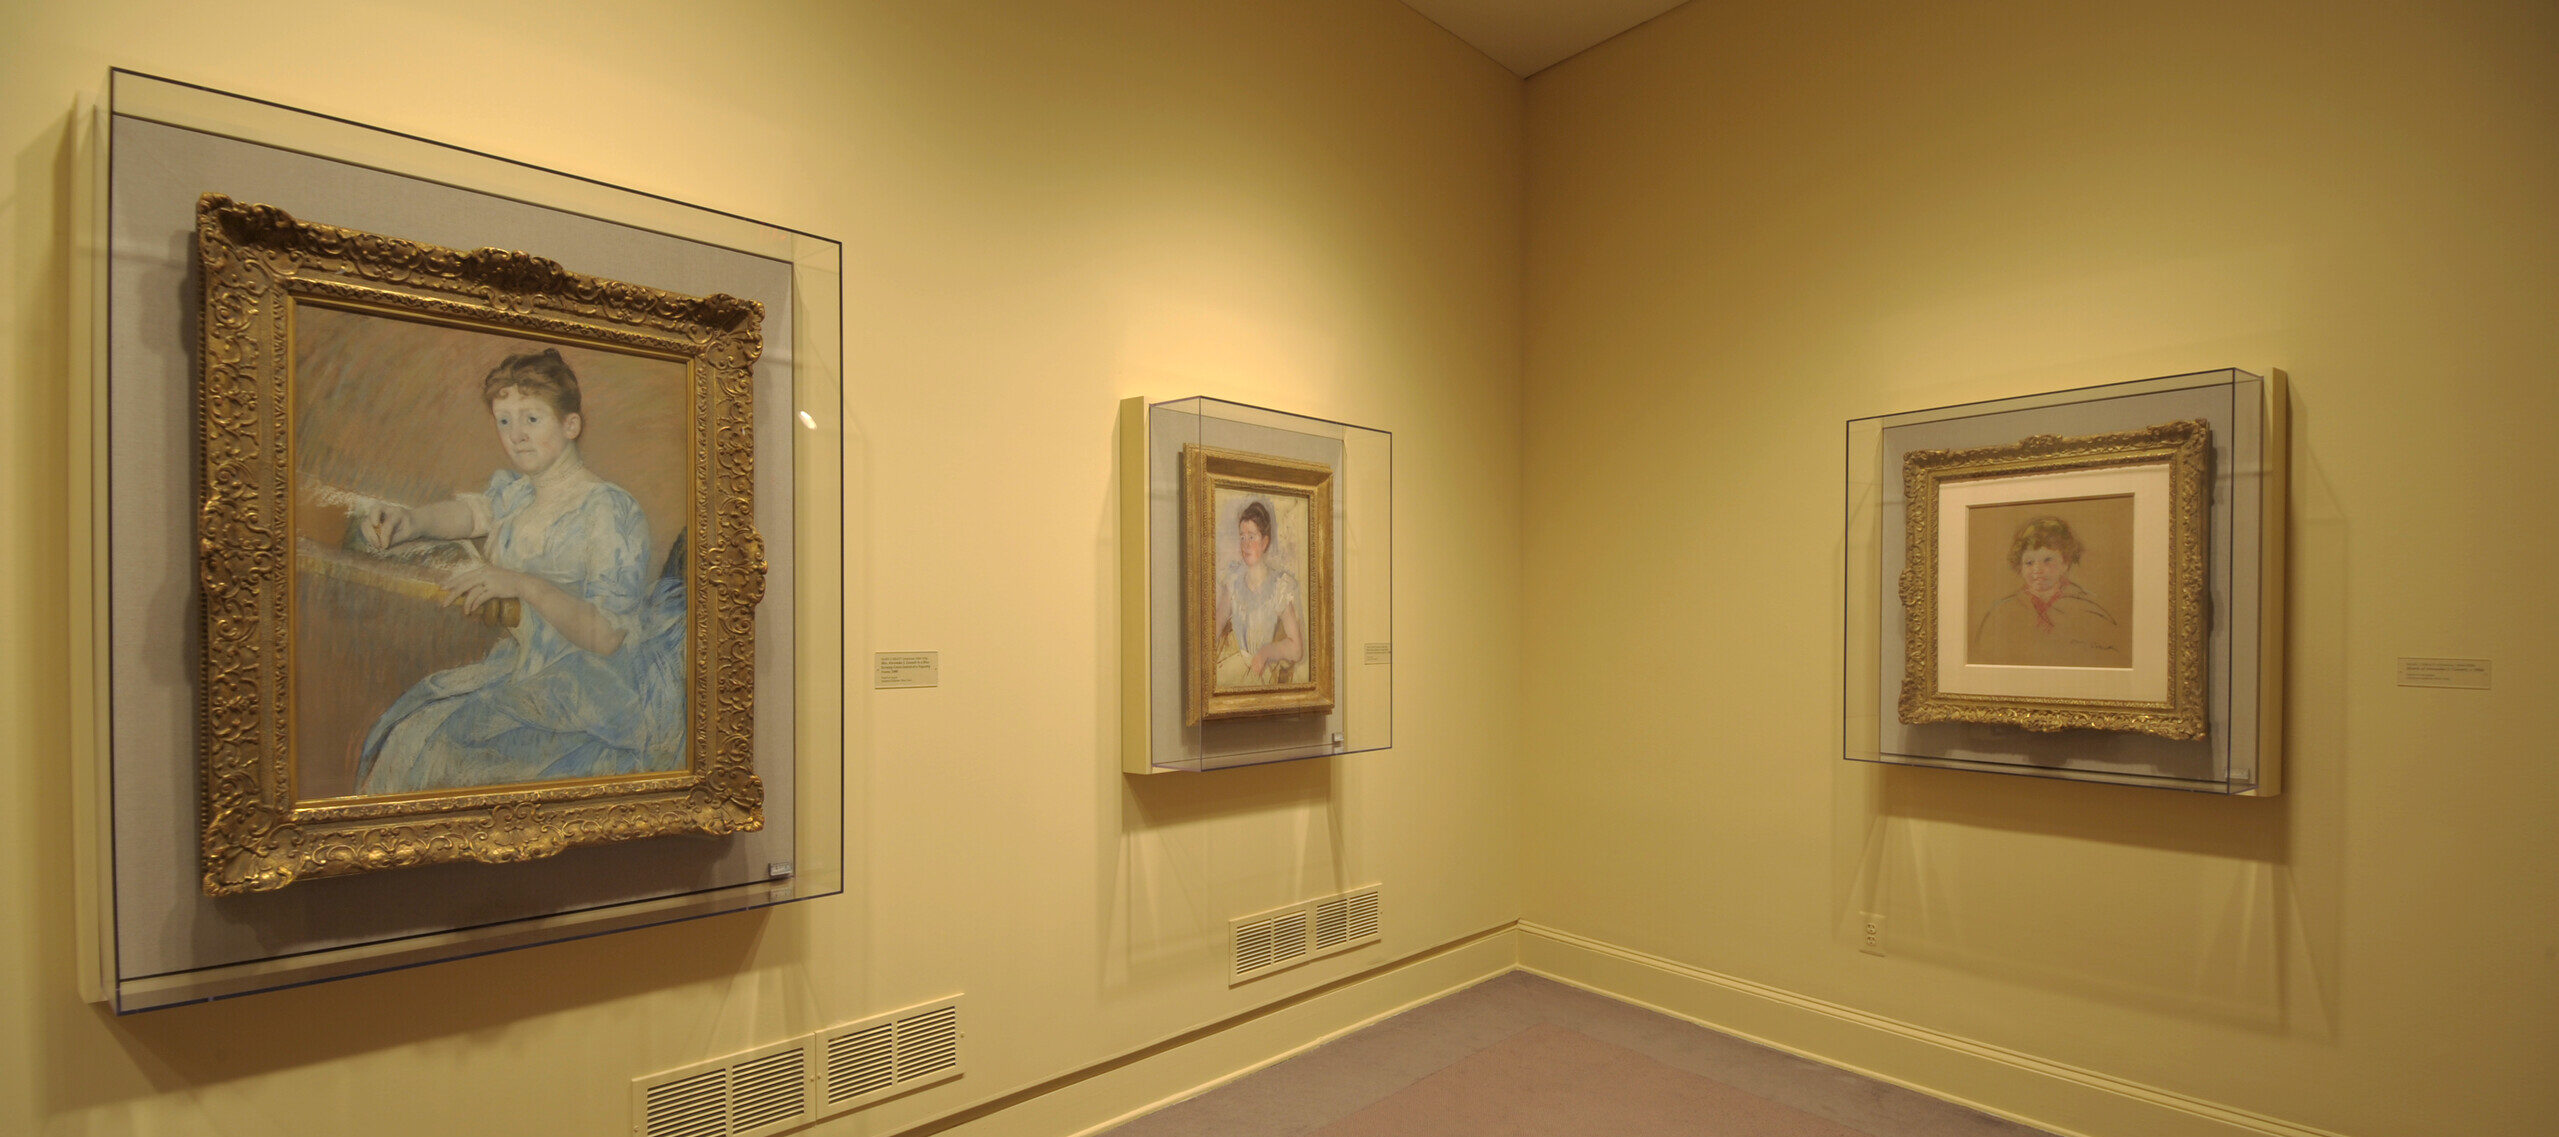 Installation view of a gallery space. One large and two smaller paintings and drawings are hanging on a yellow wall behind glass. The paintings depict women and are painted in an Impressionist style, with smooth brushstrokes and in light colors.